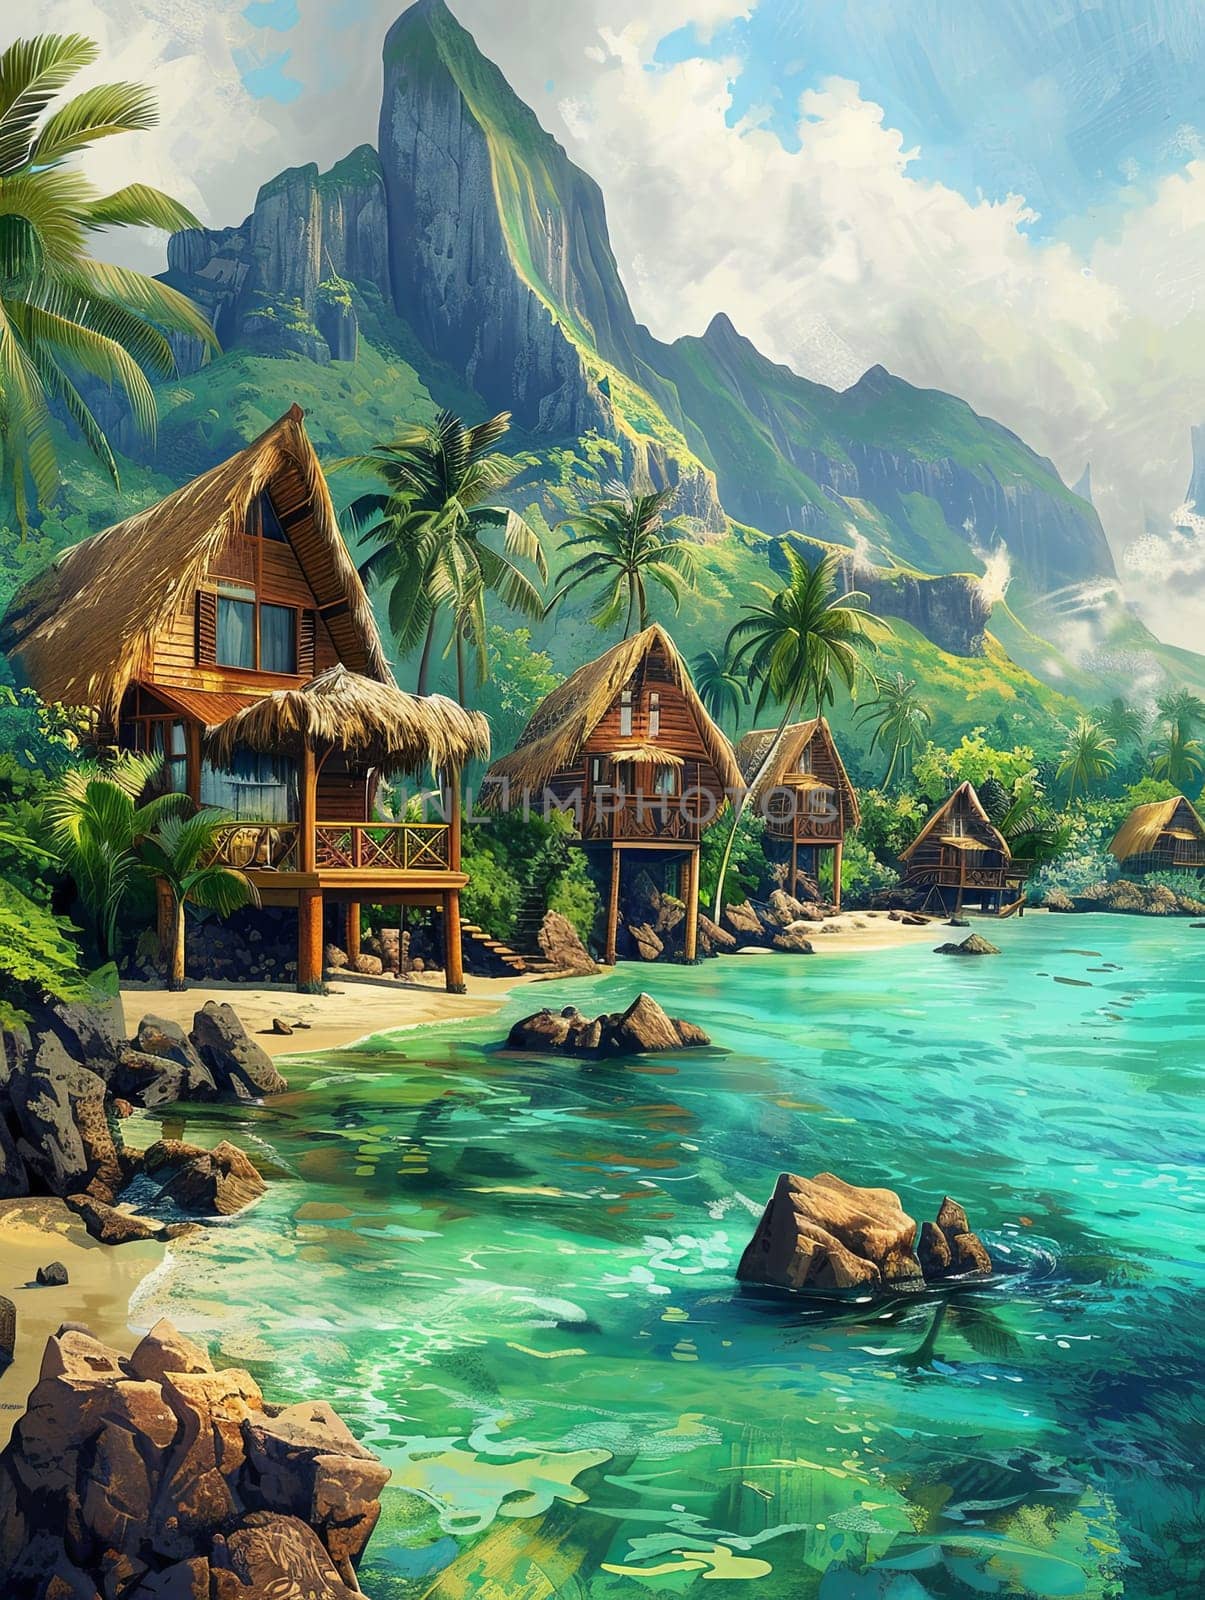 A painting depicting a tropical beach scene with palm trees and azure sea.